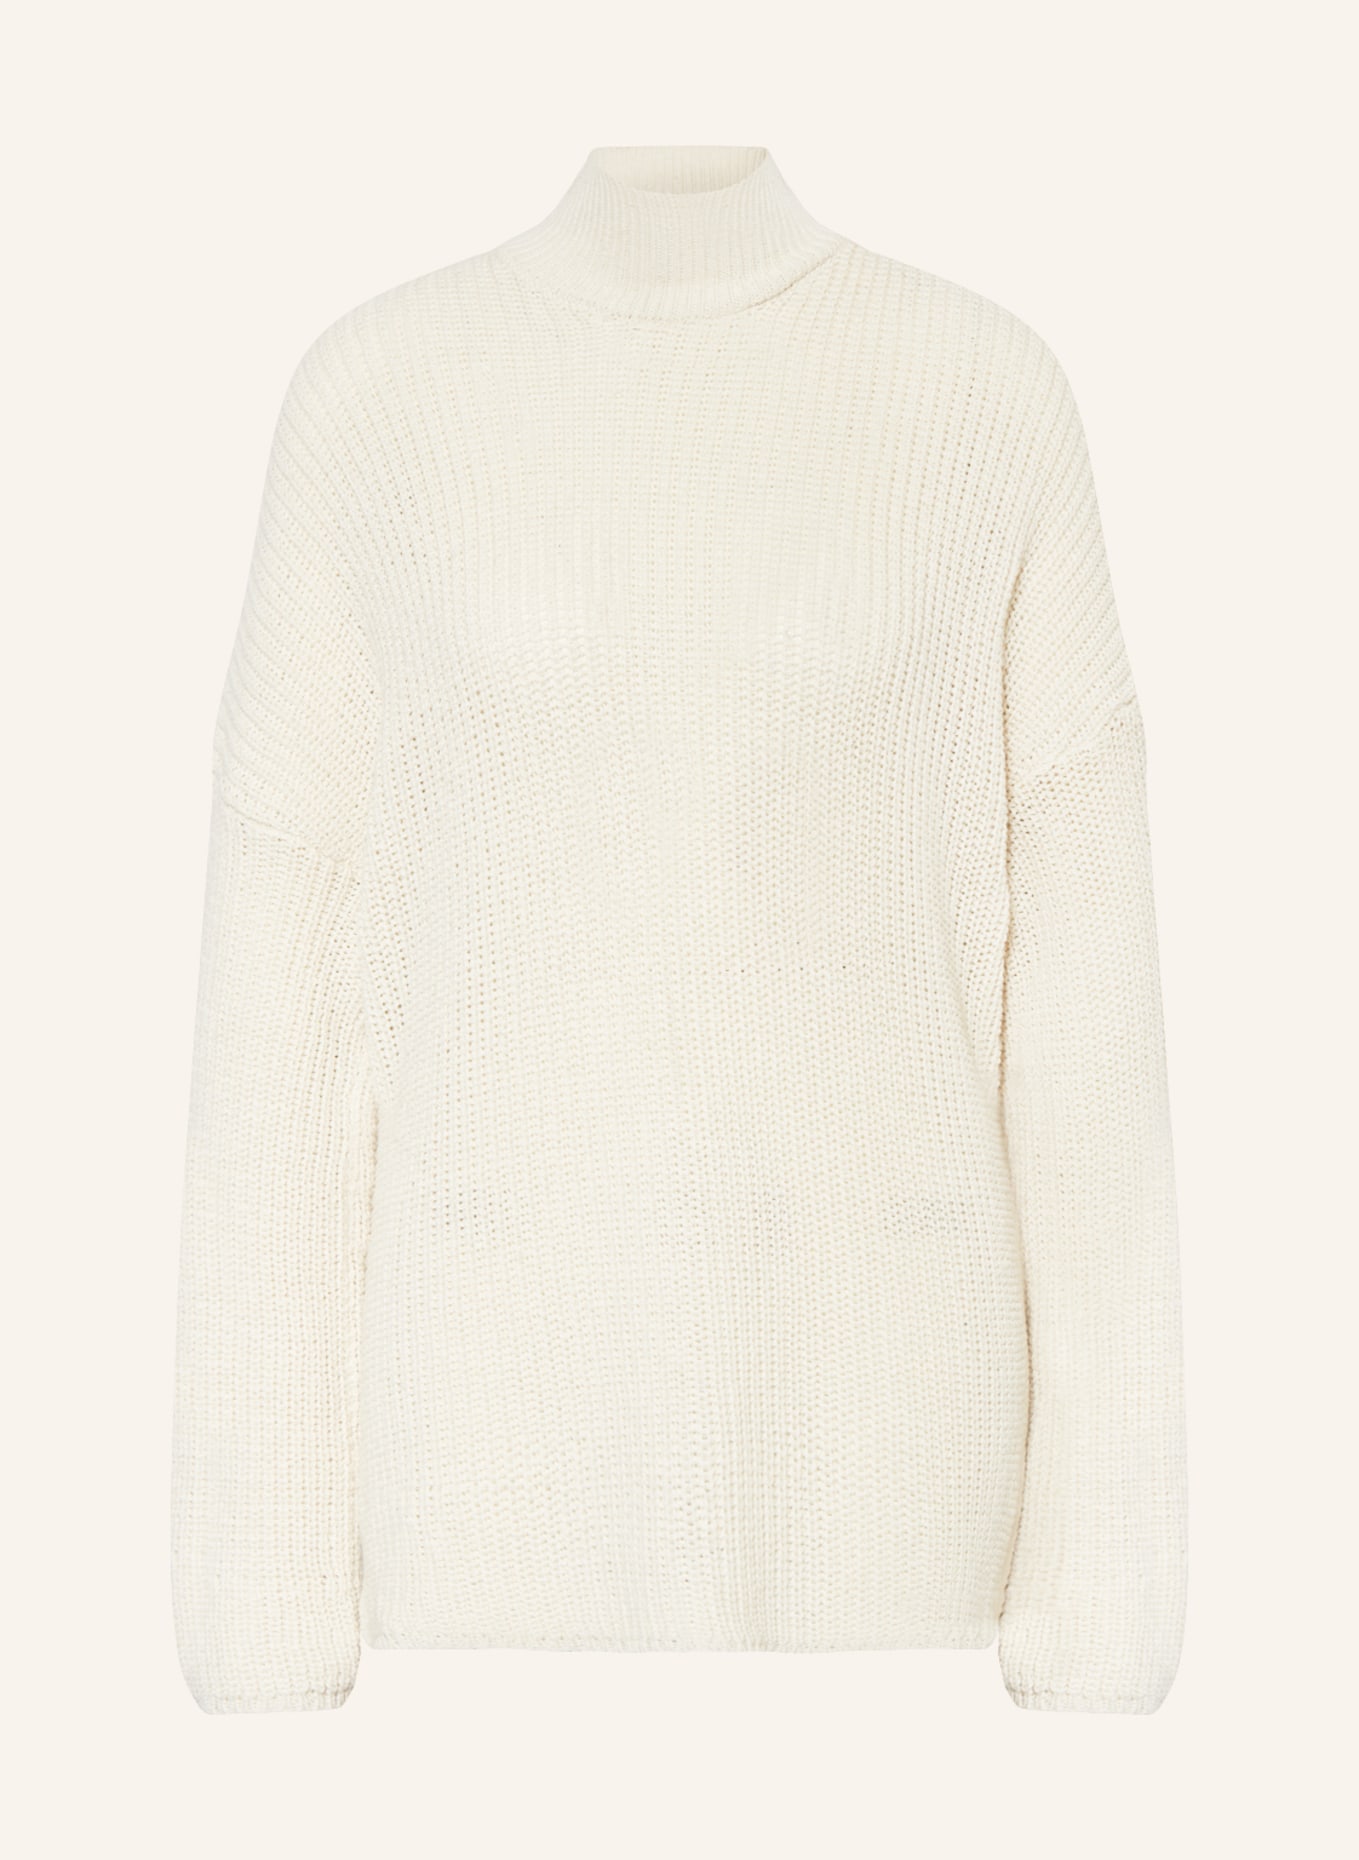 ONLY Sweater, Color: CREAM (Image 1)